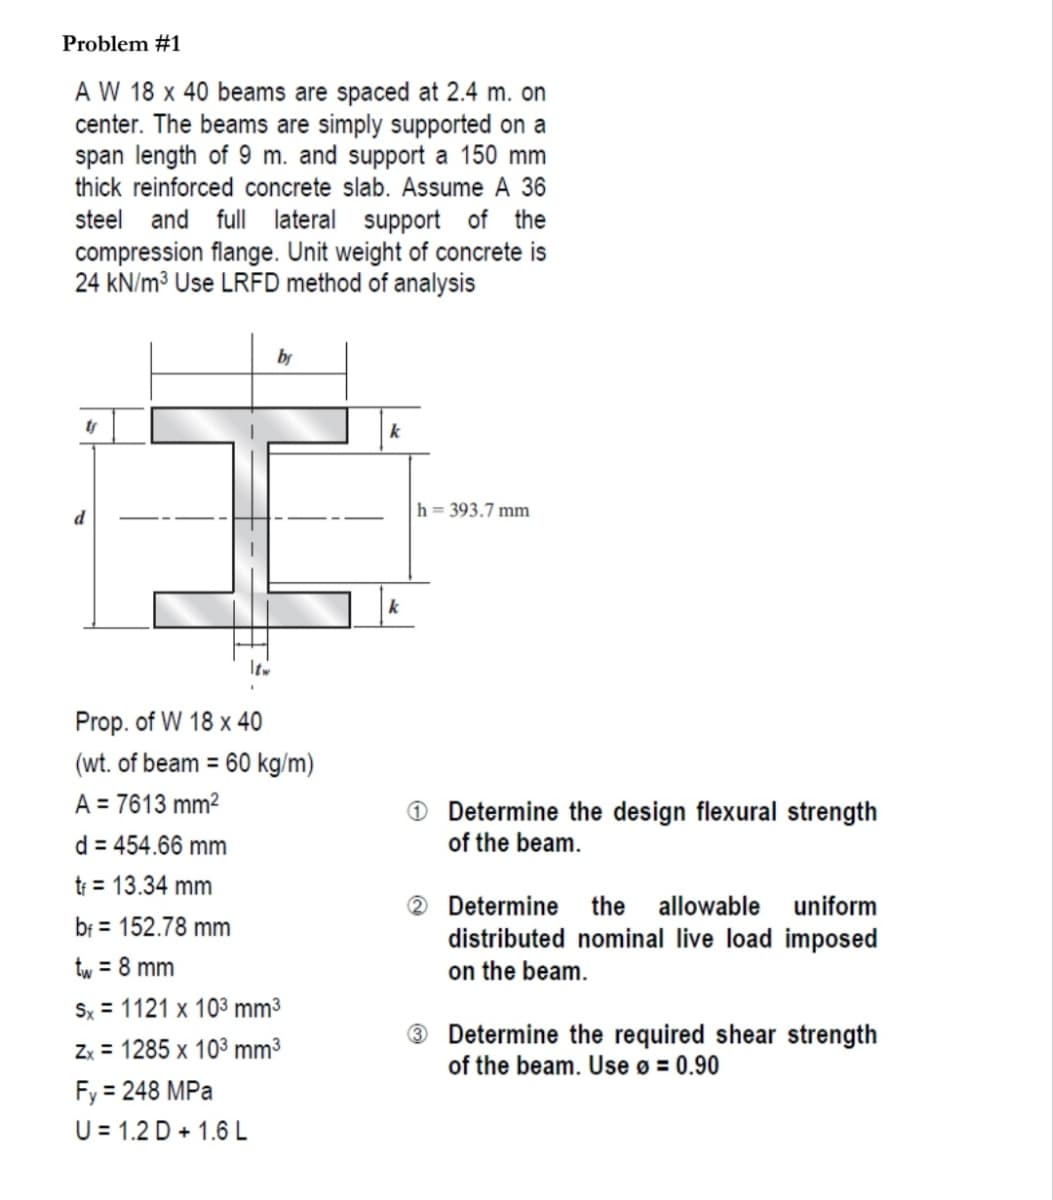 Problem #1
A W 18 x 40 beams are spaced at 2.4 m. on
center. The beams are simply supported on a
span length of 9 m. and support a 150 mm
thick reinforced concrete slab. Assume A 36
steel and full lateral support of the
compression flange. Unit weight of concrete is
24 kN/m³ Use LRFD method of analysis
by
ty
k
h = 393.7 mm
d
Prop. of W 18 x 40
(wt. of beam = 60 kg/m)
A = 7613 mm2
O Determine the design flexural strength
of the beam.
d = 454.66 mm
tr = 13.34 mm
® Determine
distributed nominal live load imposed
on the beam.
the
allowable
uniform
bf = 152.78 mm
tw = 8 mm
Sx = 1121 x 103 mm³
Determine the required shear strength
of the beam. Use ø = 0.90
Zx = 1285 x 103 mm³
Fy = 248 MPa
U = 1.2 D + 1.6 L
